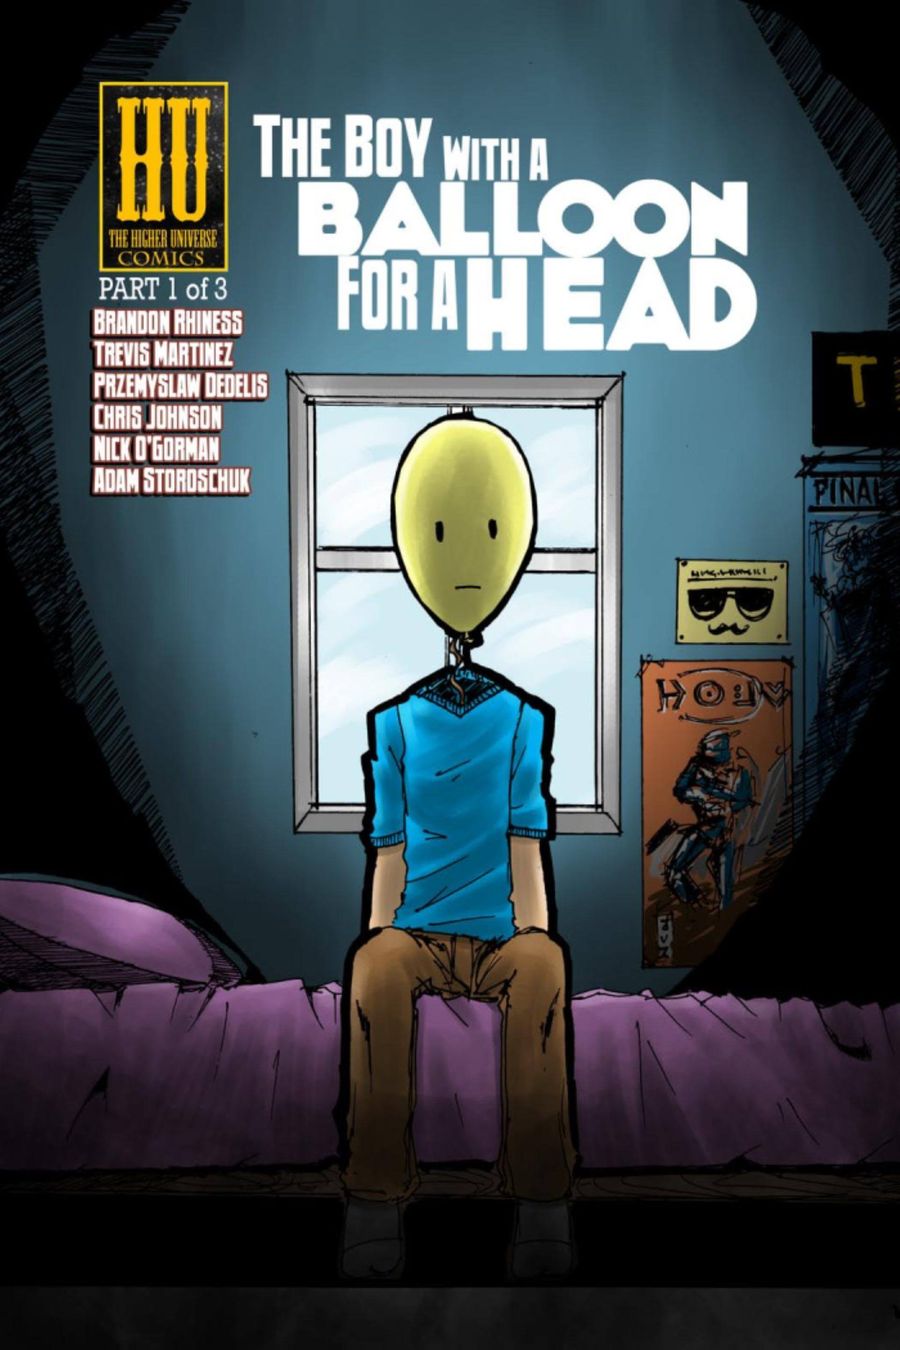 Higher Universe Comics | The Boy with a Balloon for a Head #1 page 1 | Spinwhiz Comics